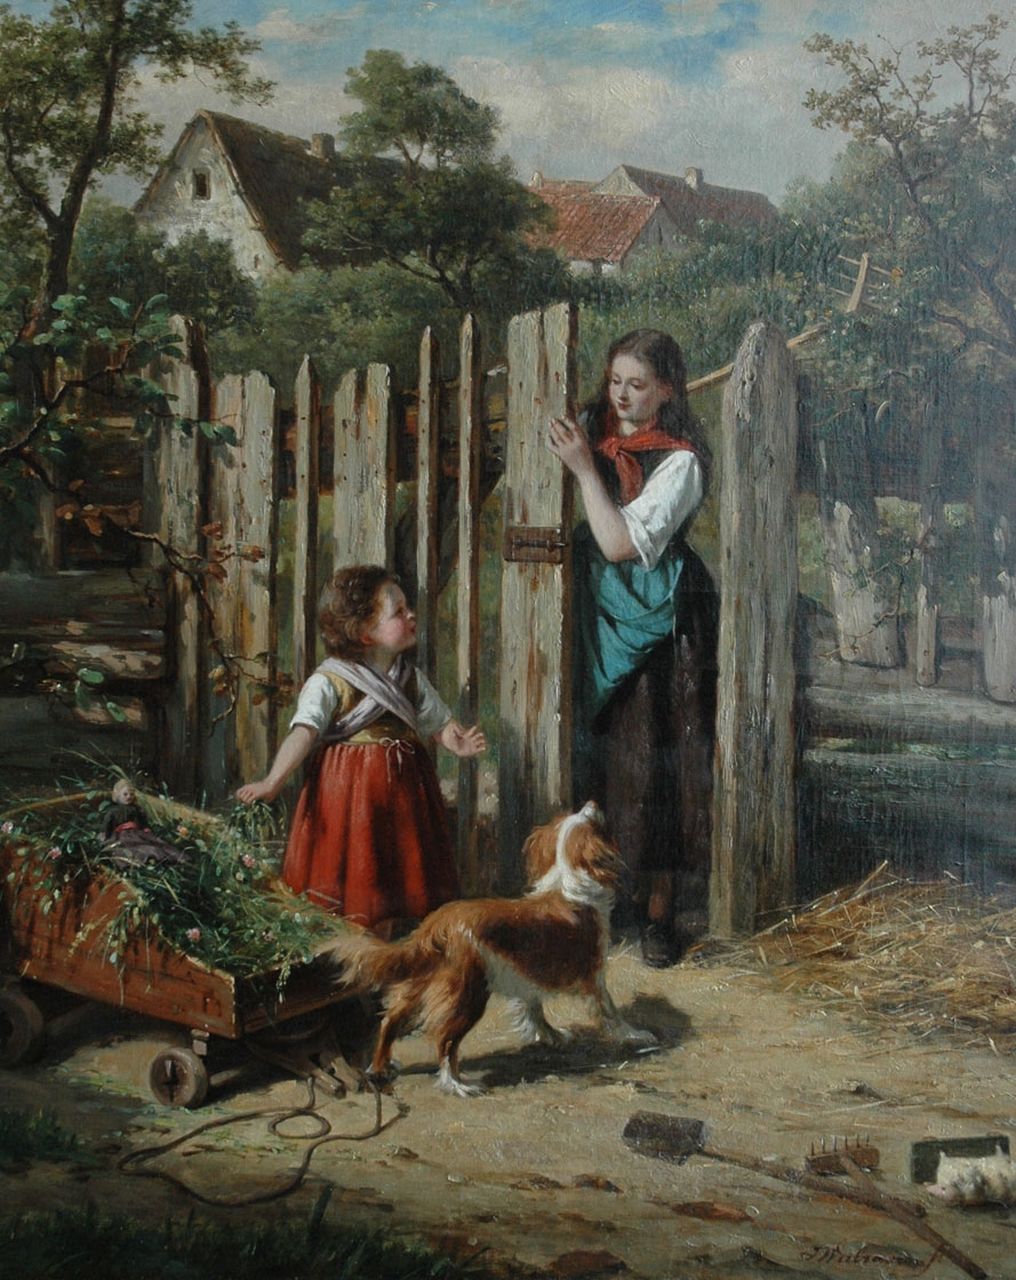 Walraven J.  | Jan Walraven, A playing girl with her dog, oil on canvas 69.8 x 57.1 cm, signed l.r.